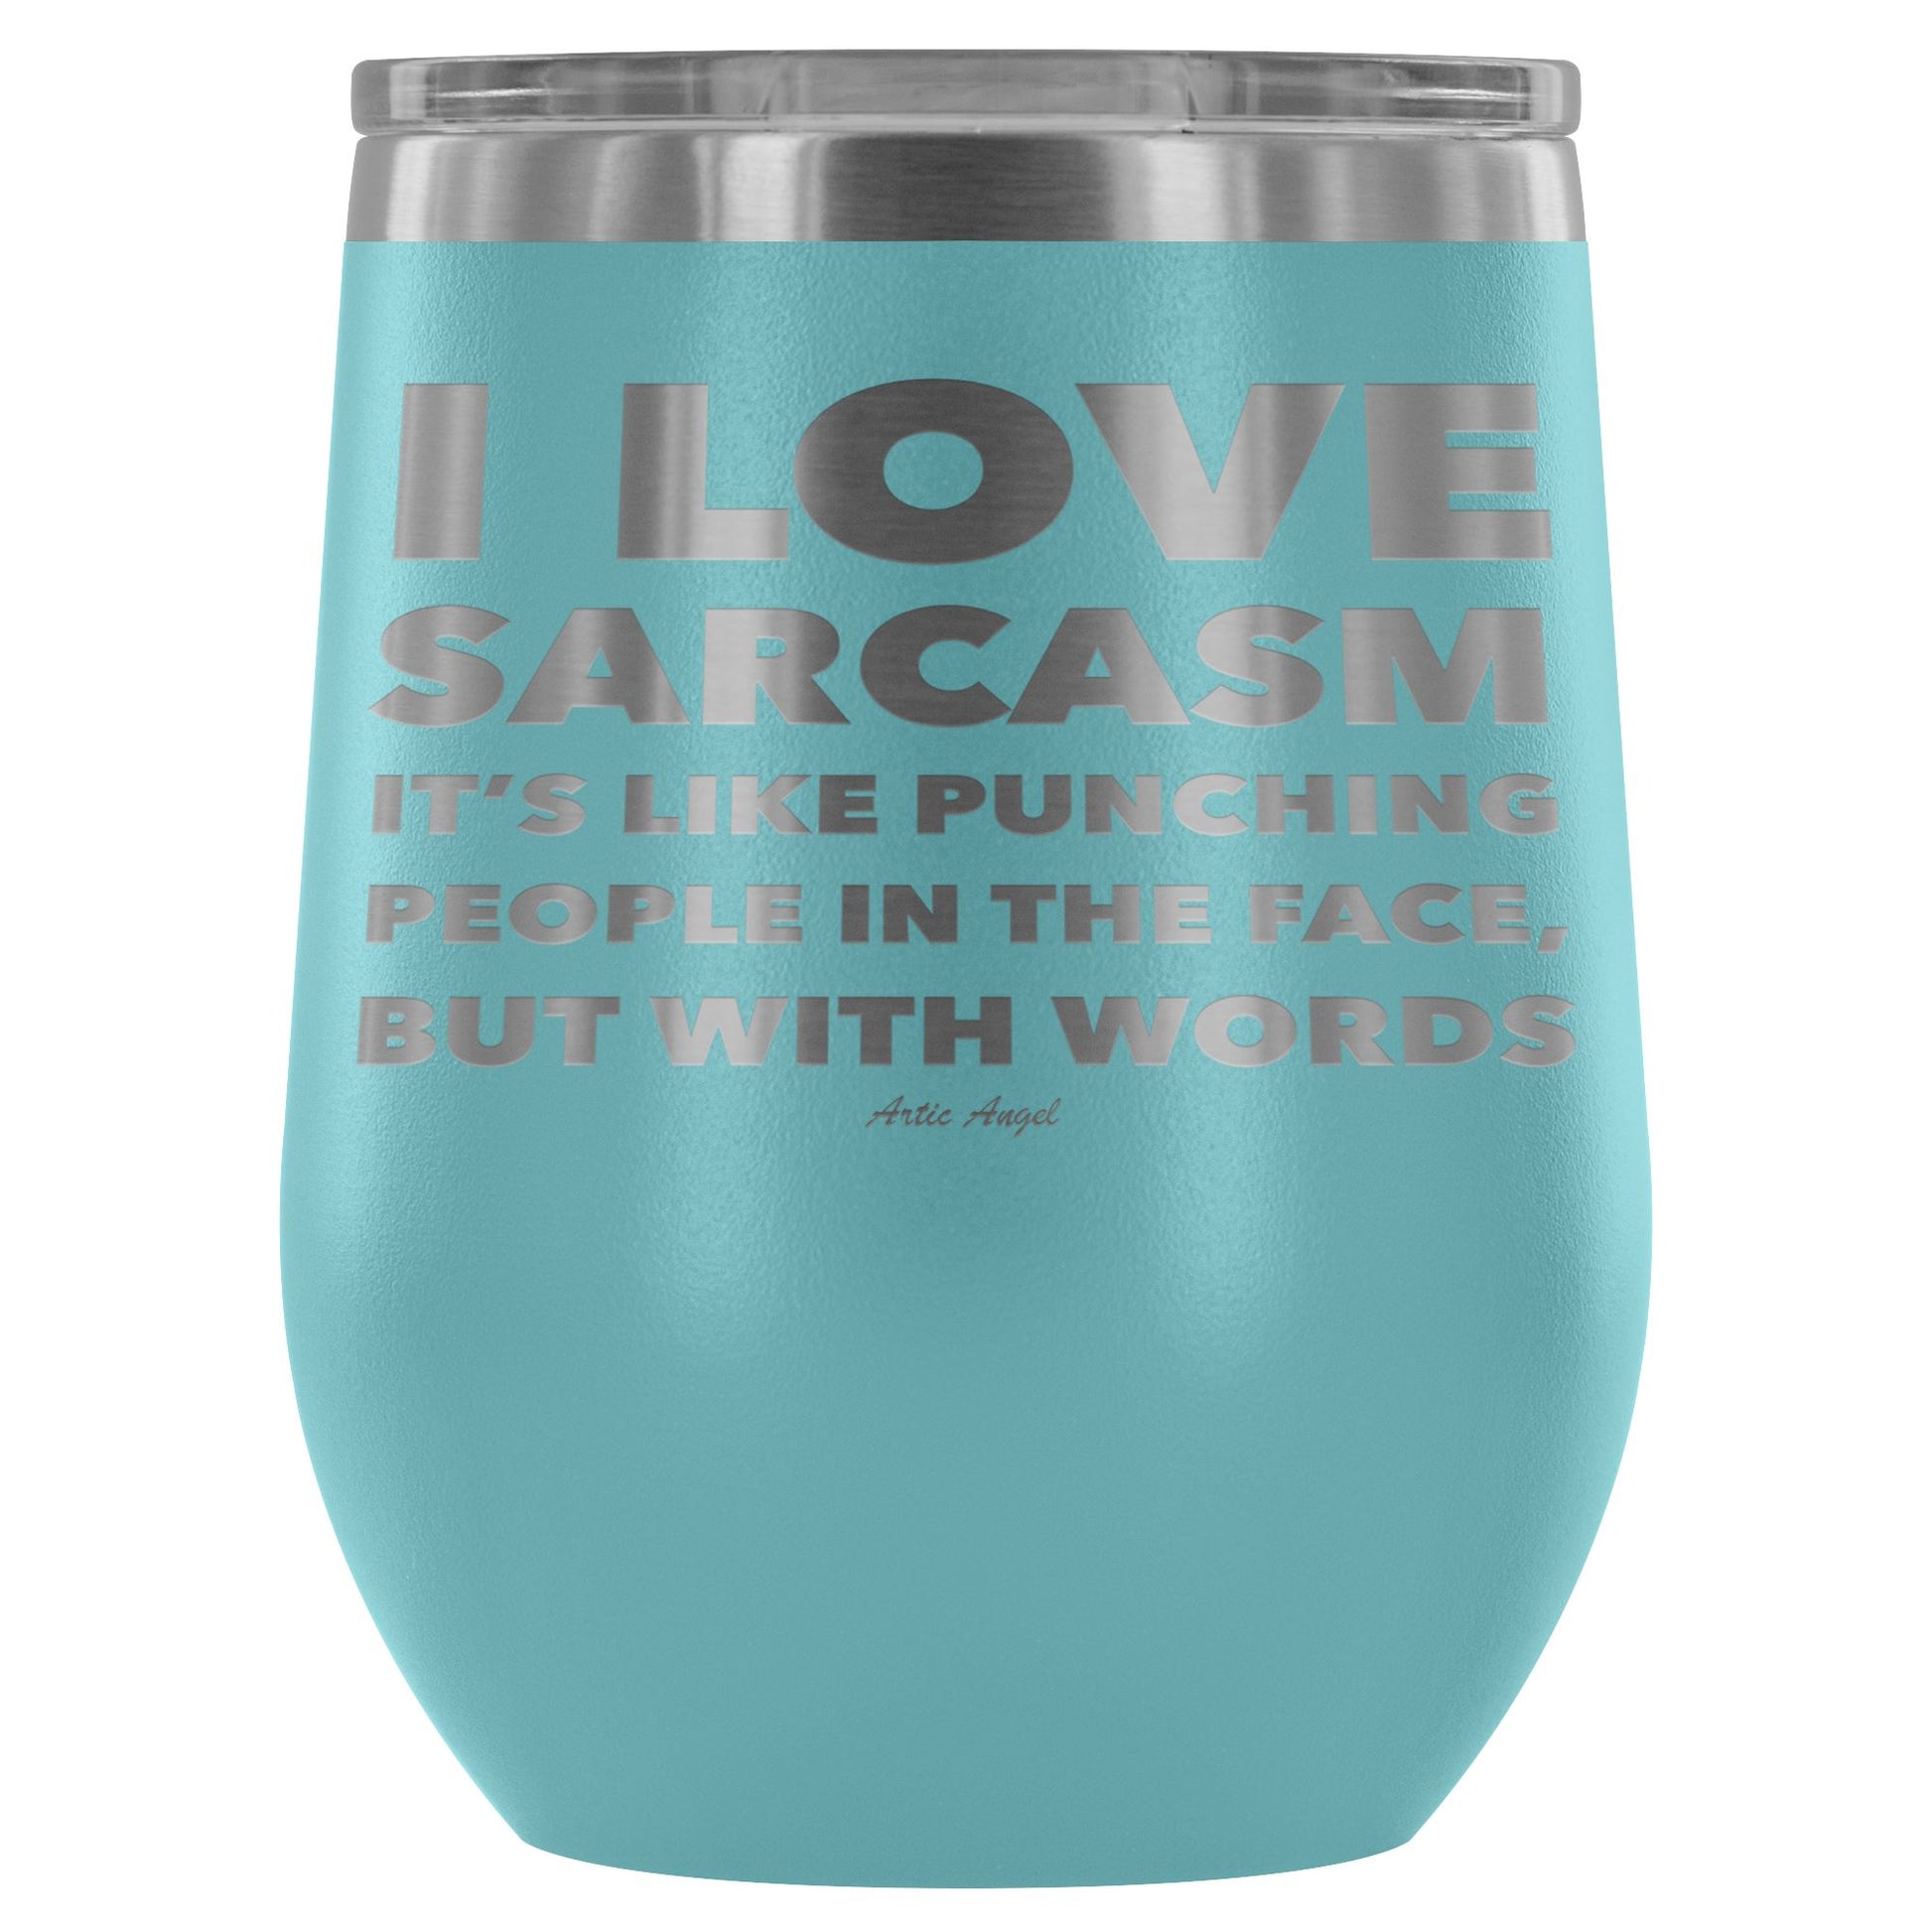 "I Love Sarcasm It's Like Punching People In The Face, But With Words" - Stemless Wine Cup Wine Tumbler Light Blue 